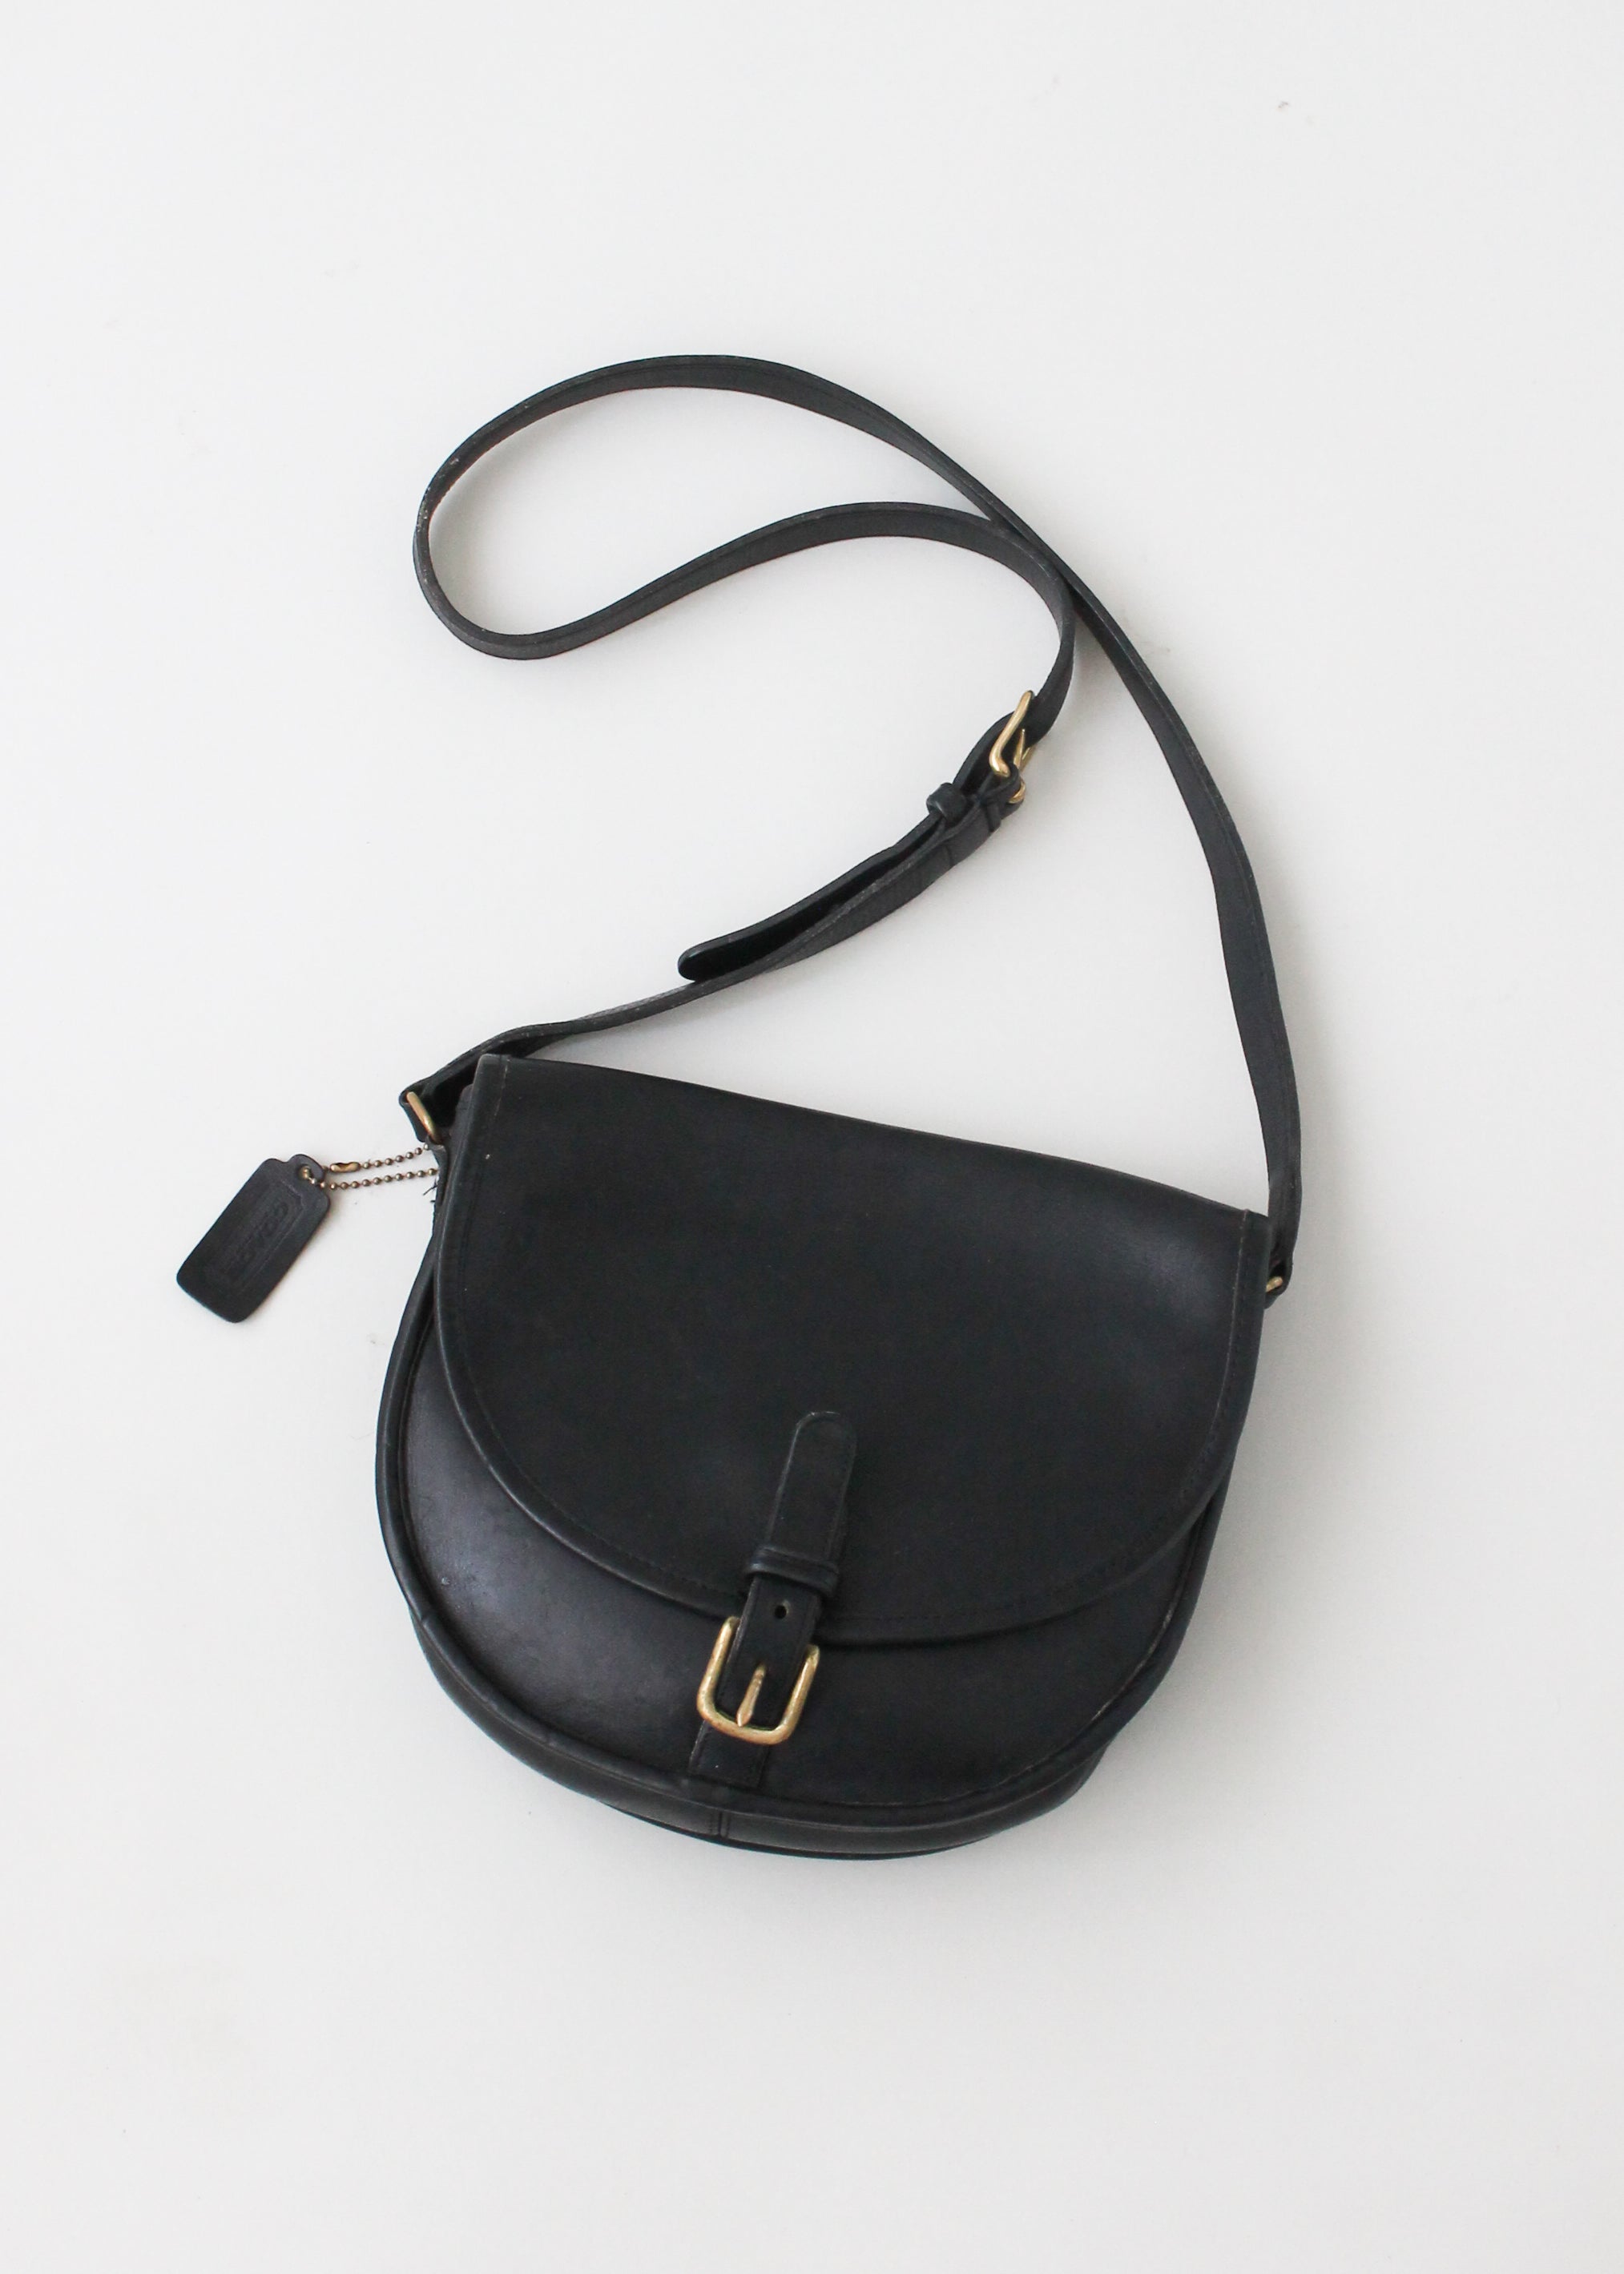 Vintage 1980s Black Leather Coach Bag Selected By Raleigh Vintage